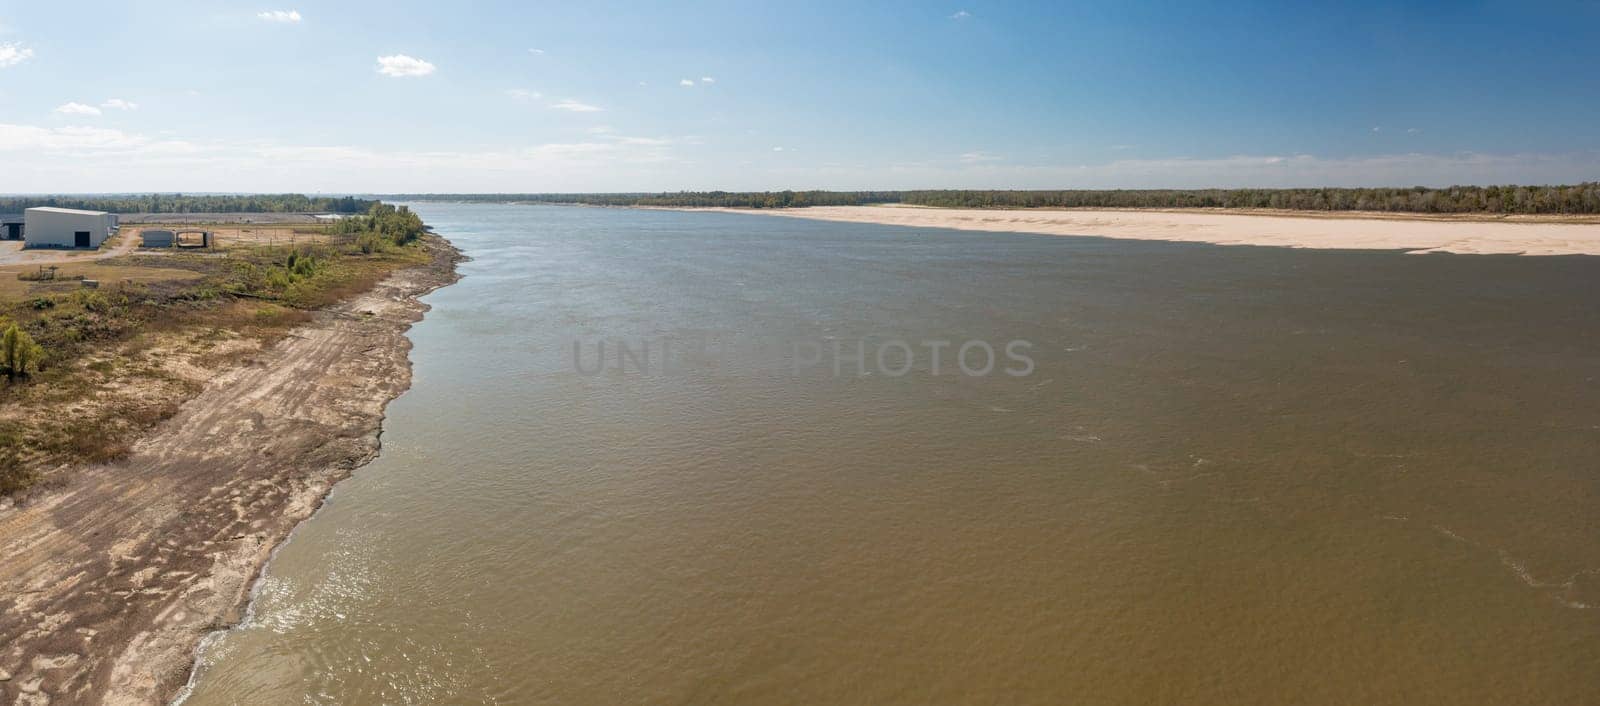 Extreme low water conditions on Mississippi river in October 2023 narrows river channel near Vicksburg MS